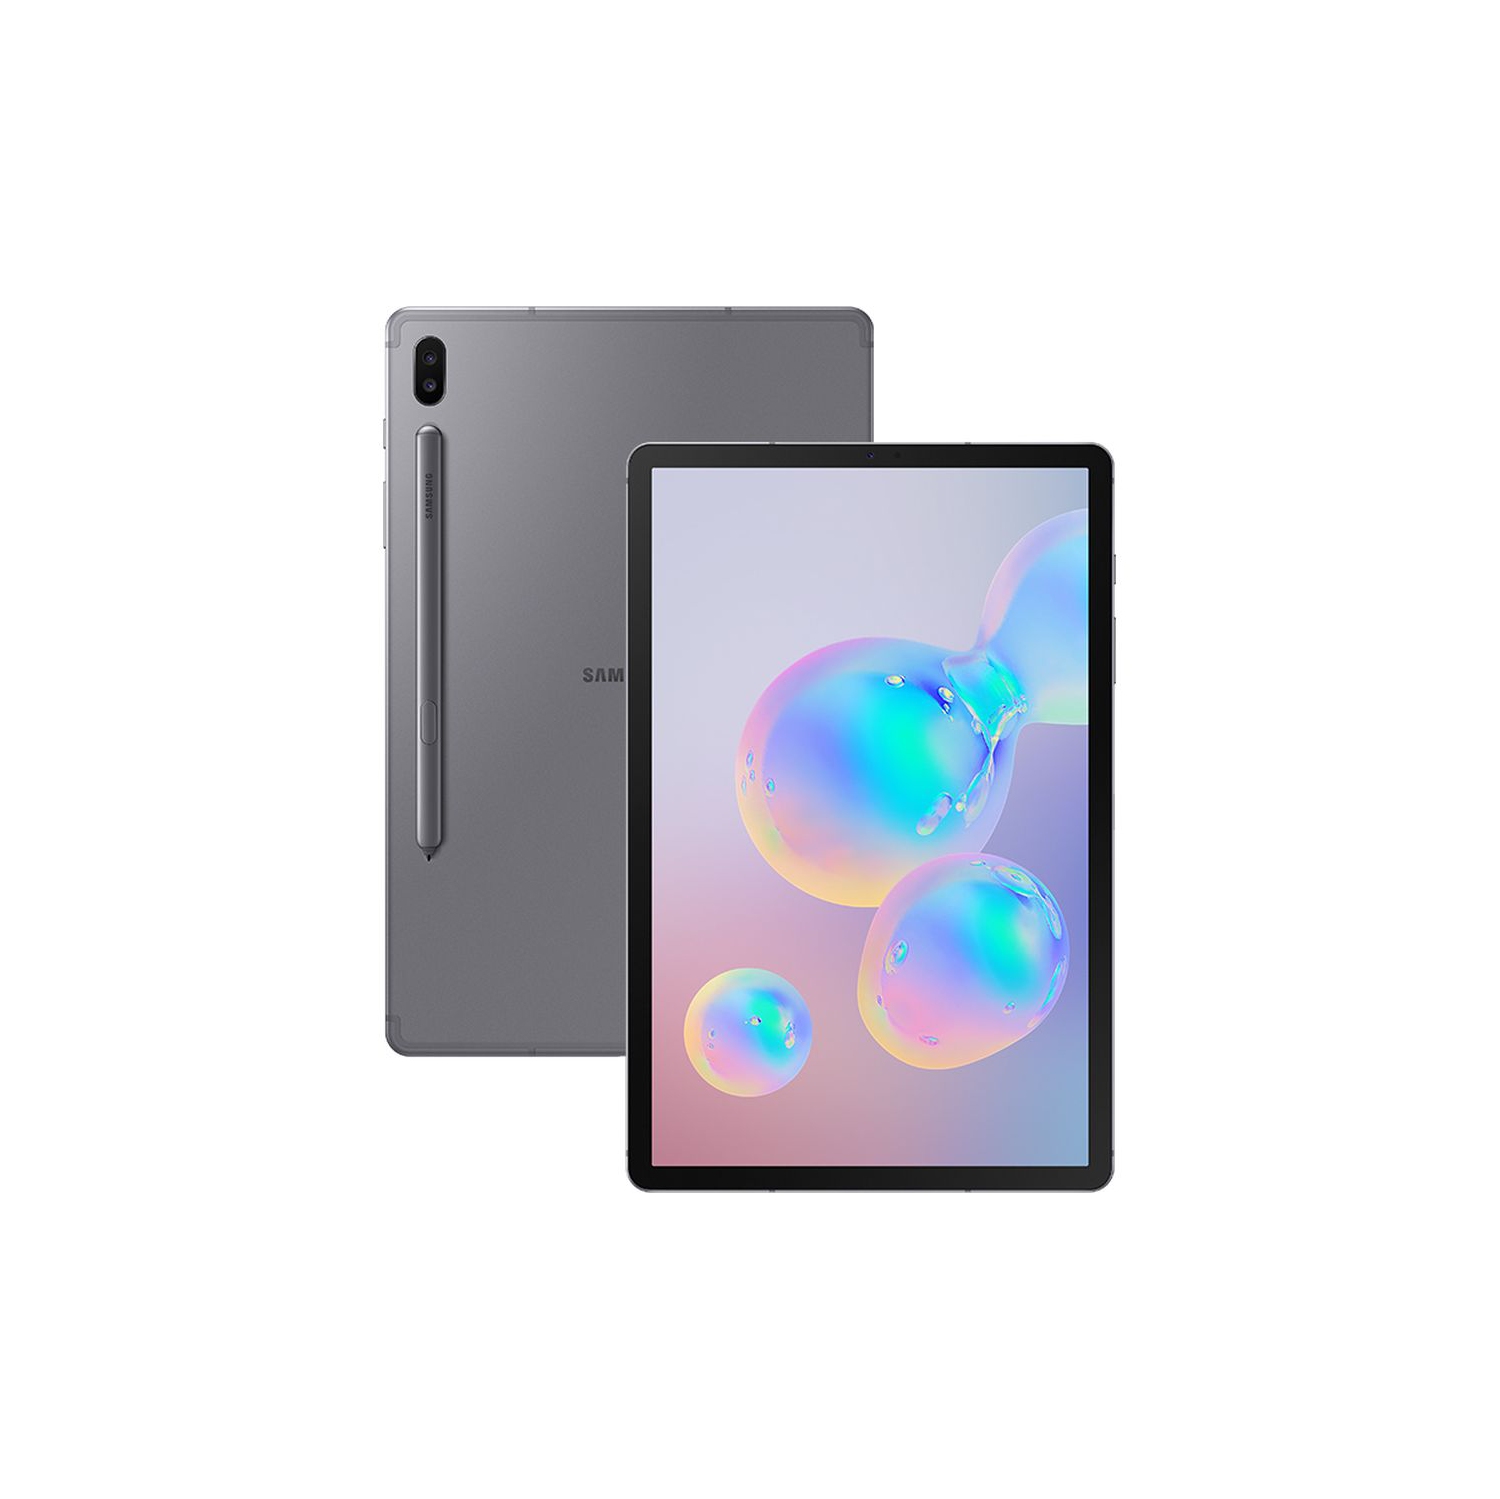 Refurbished (Excellent) - Samsung Galaxy Tab S6 10.5" 256GB Android 9 Tablet With Snapdragon 8150 8-Core Processor - Mountain Grey